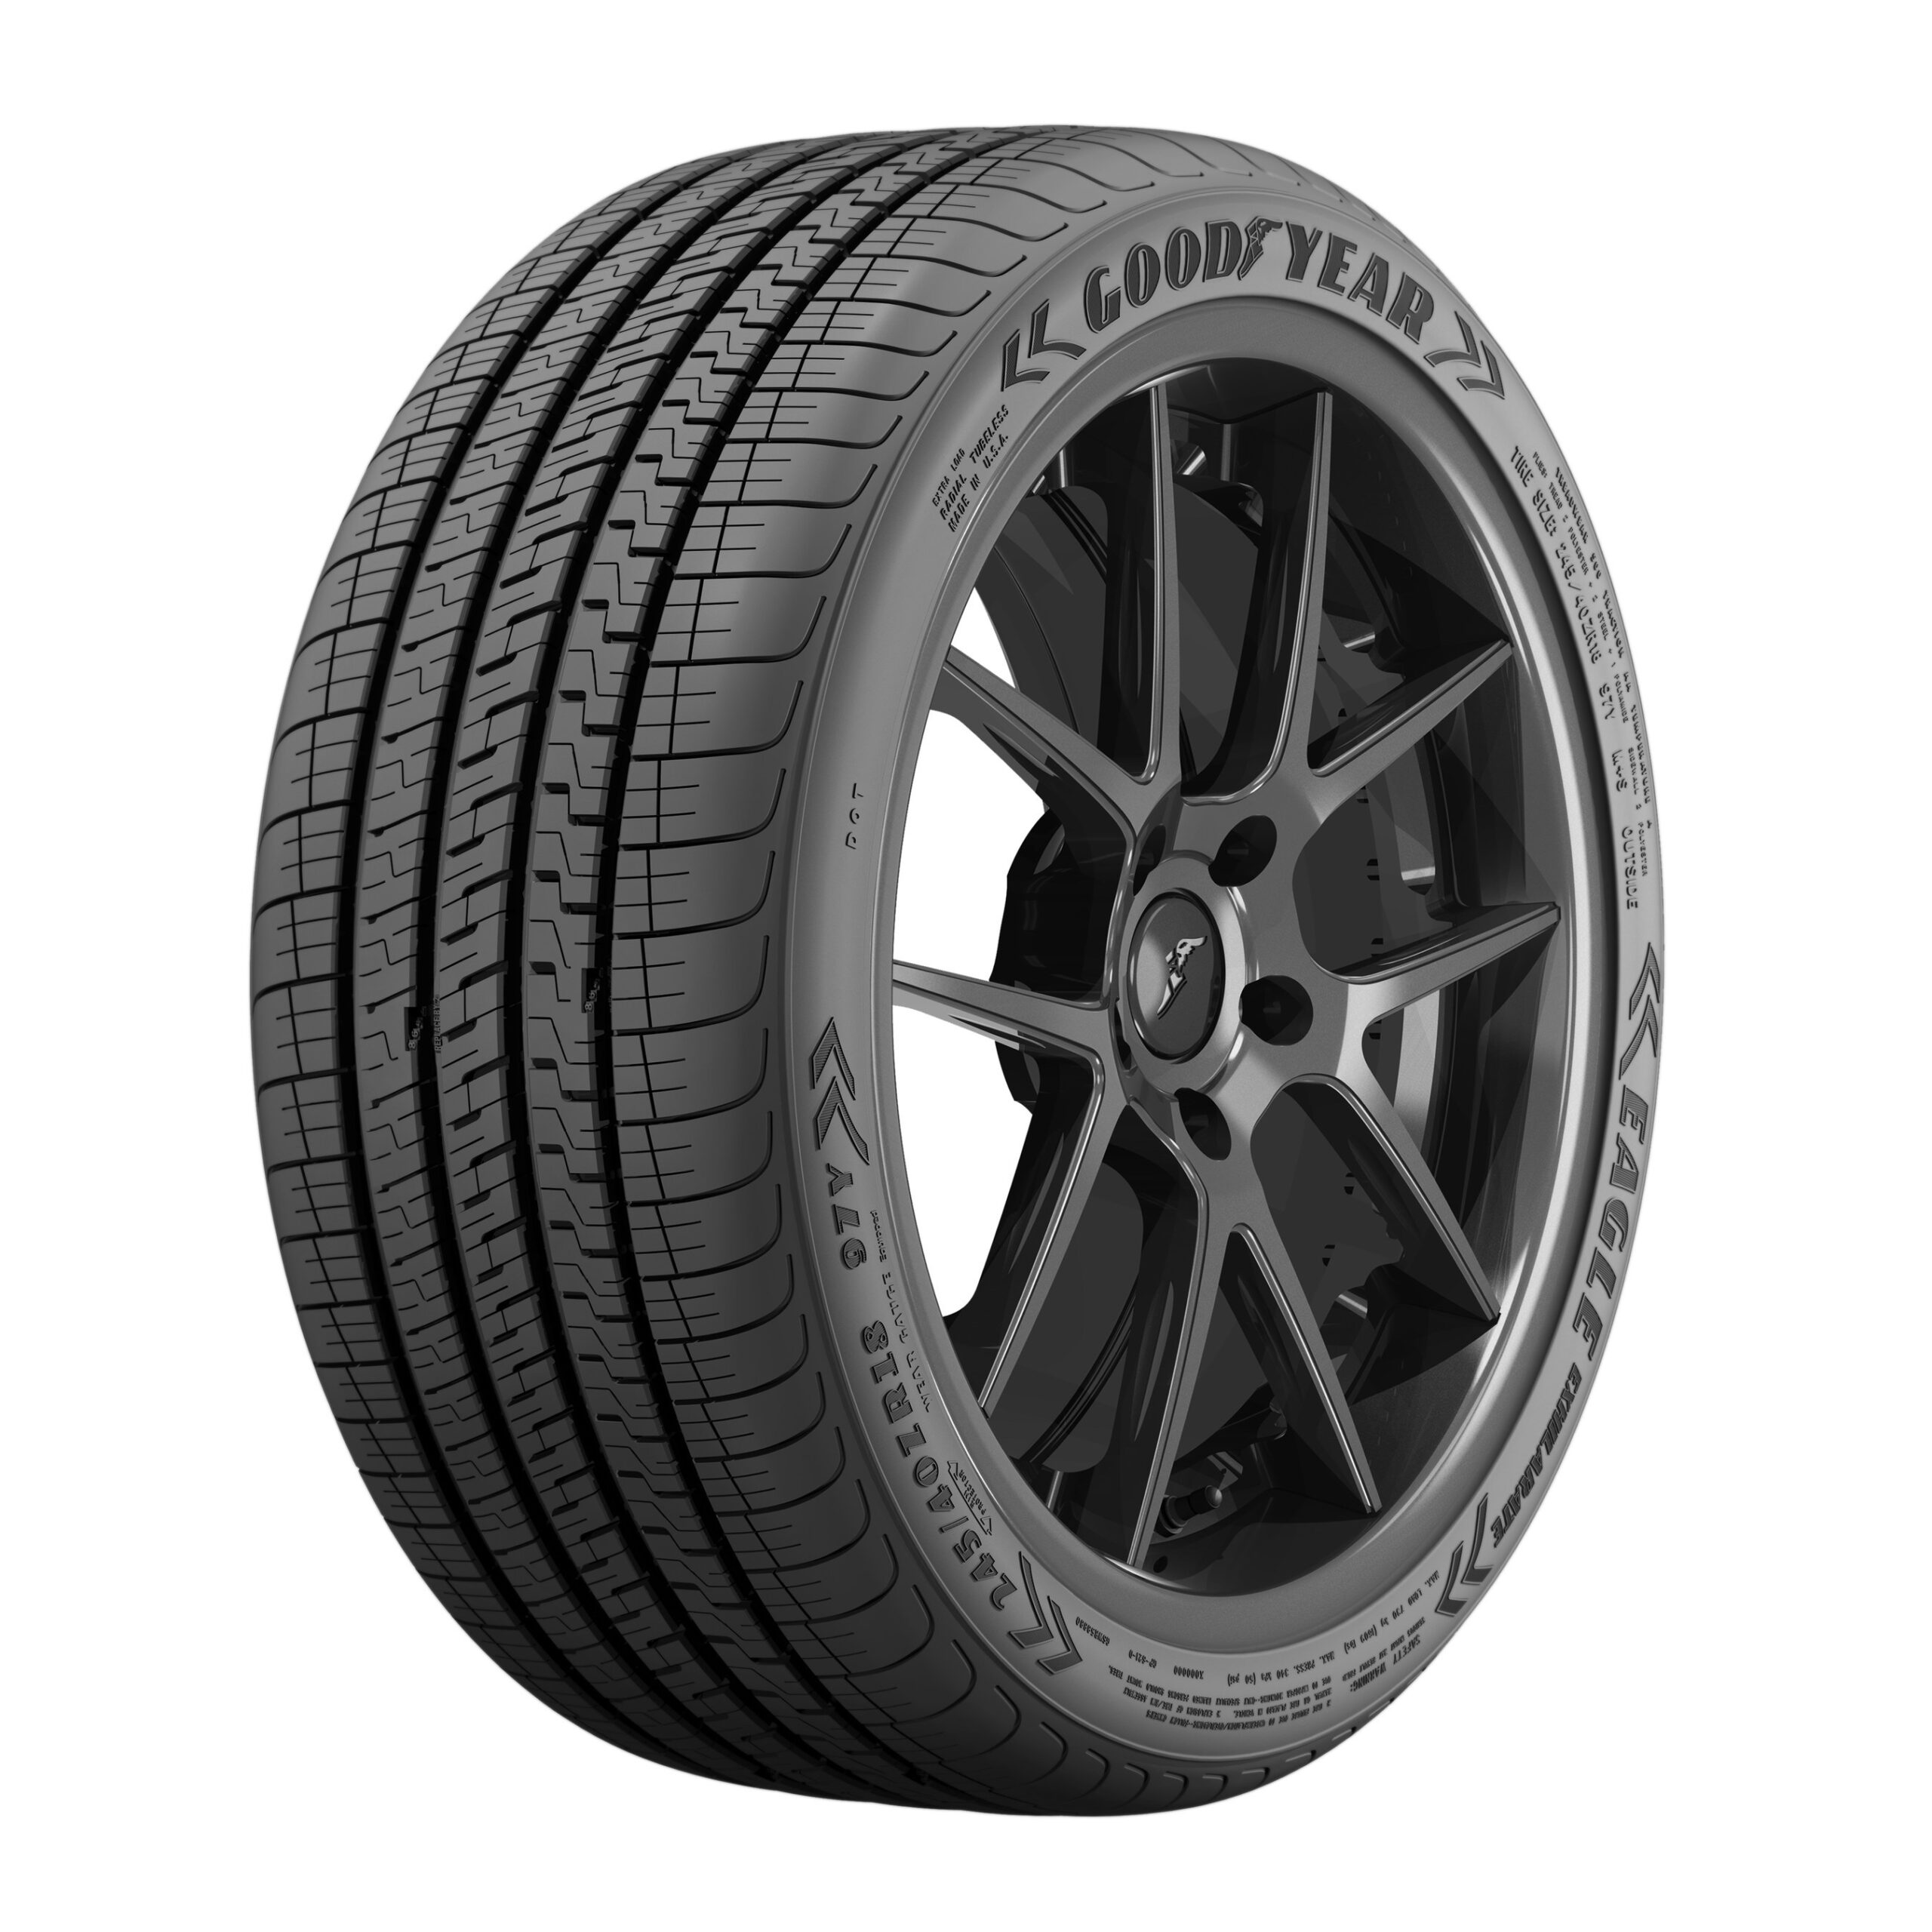 GOODYEAR INTRODUCES 16 POPULAR NEW SIZES FOR EAGLE EXHILARATE